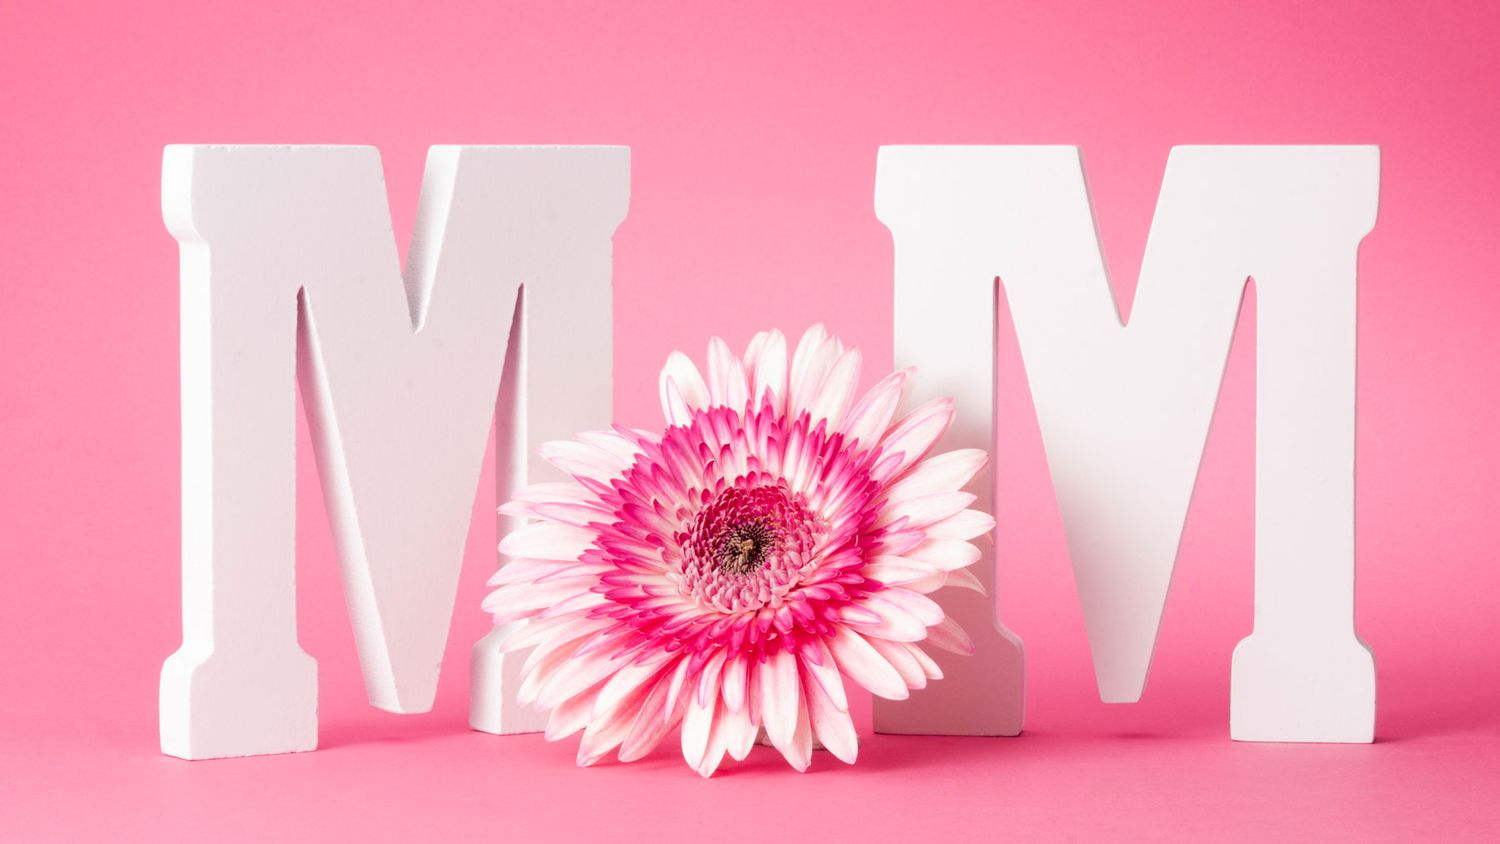 World celebrates Mother’s Day today